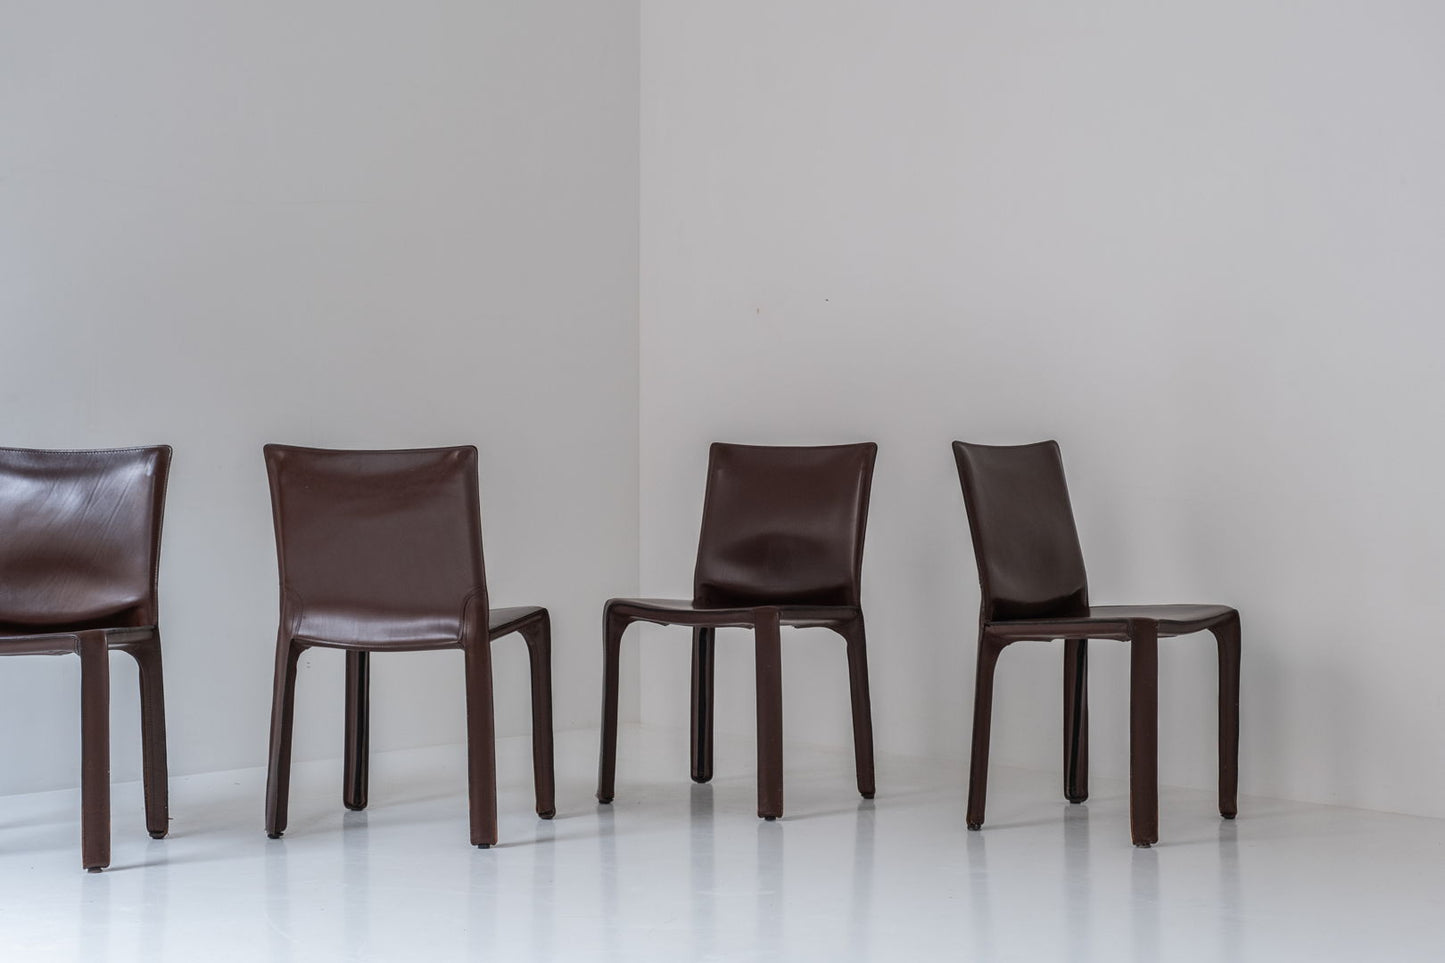 Set of four ‘413’ CAB dining chairs by Mario Bellini for Cassina, Italy 1977.